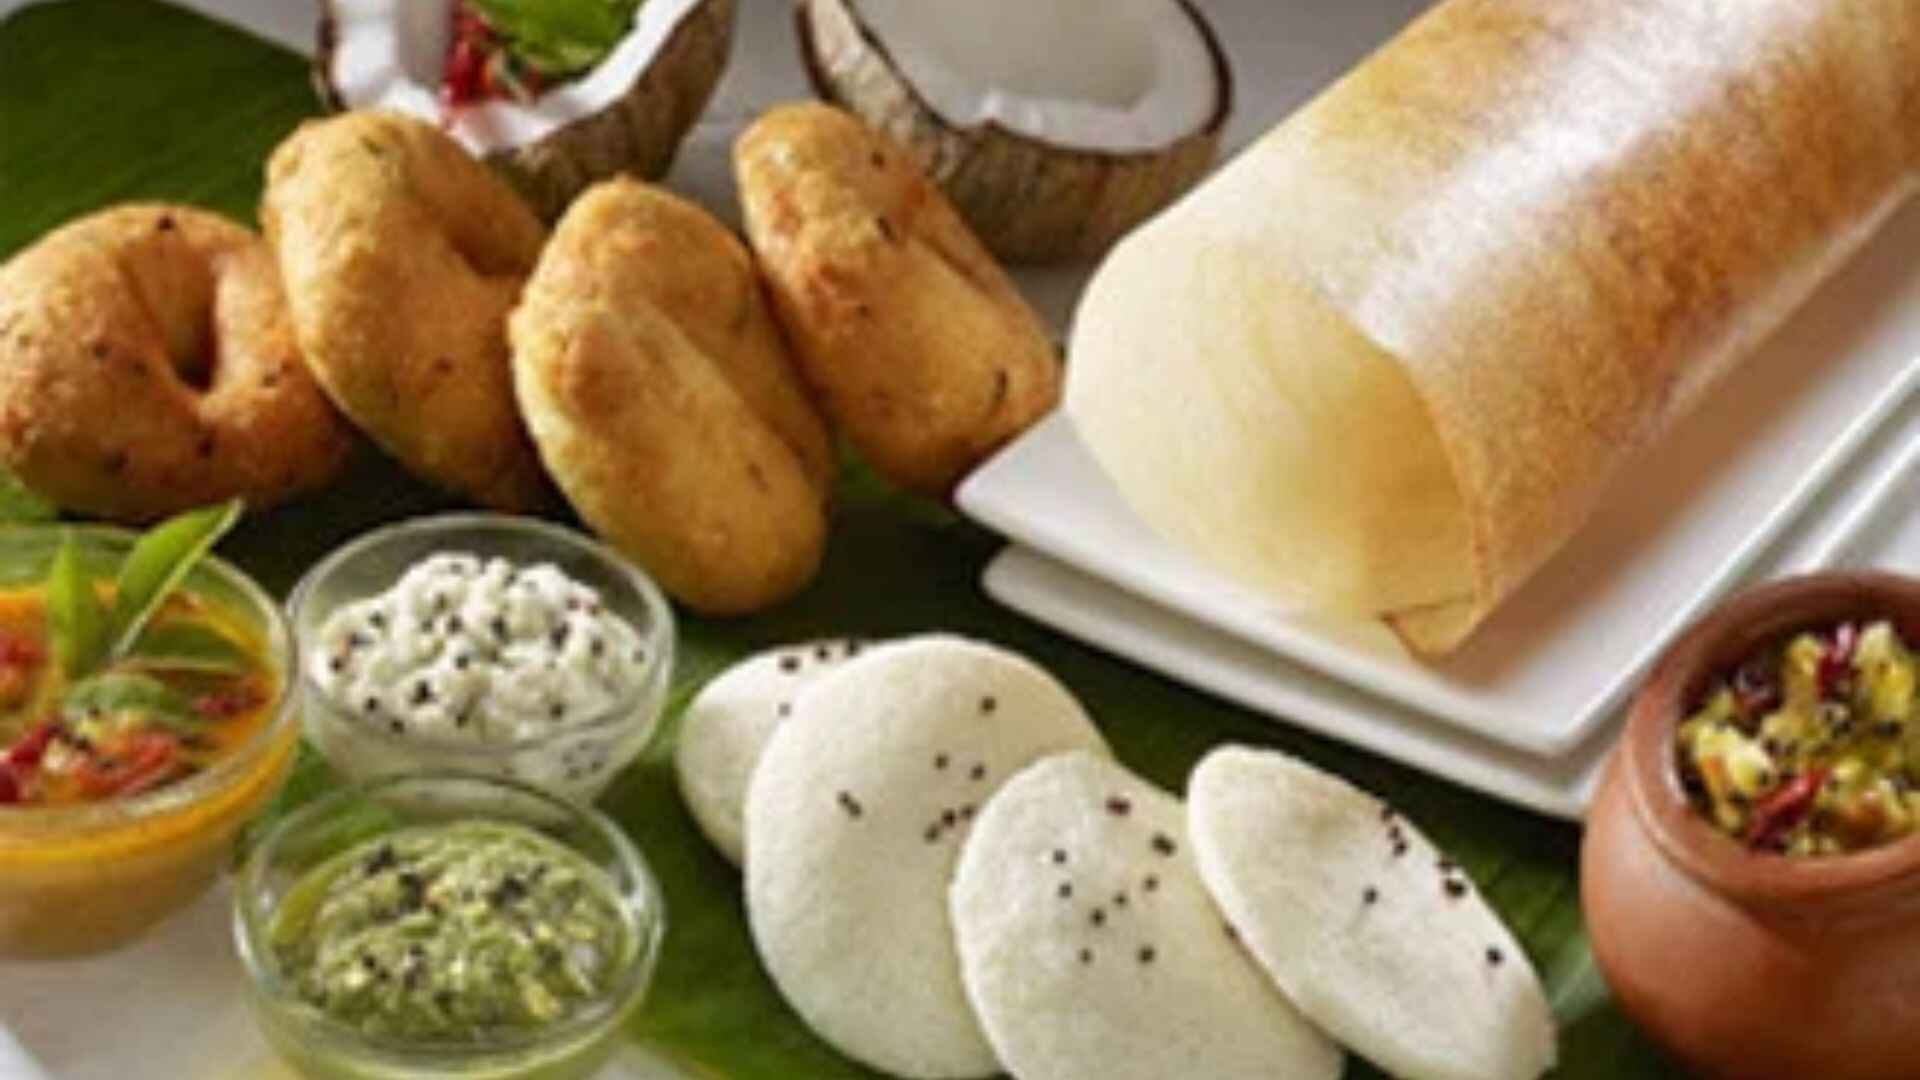 Bengaluru Restaurant Fined For Serving Cold Food To High BP Patient